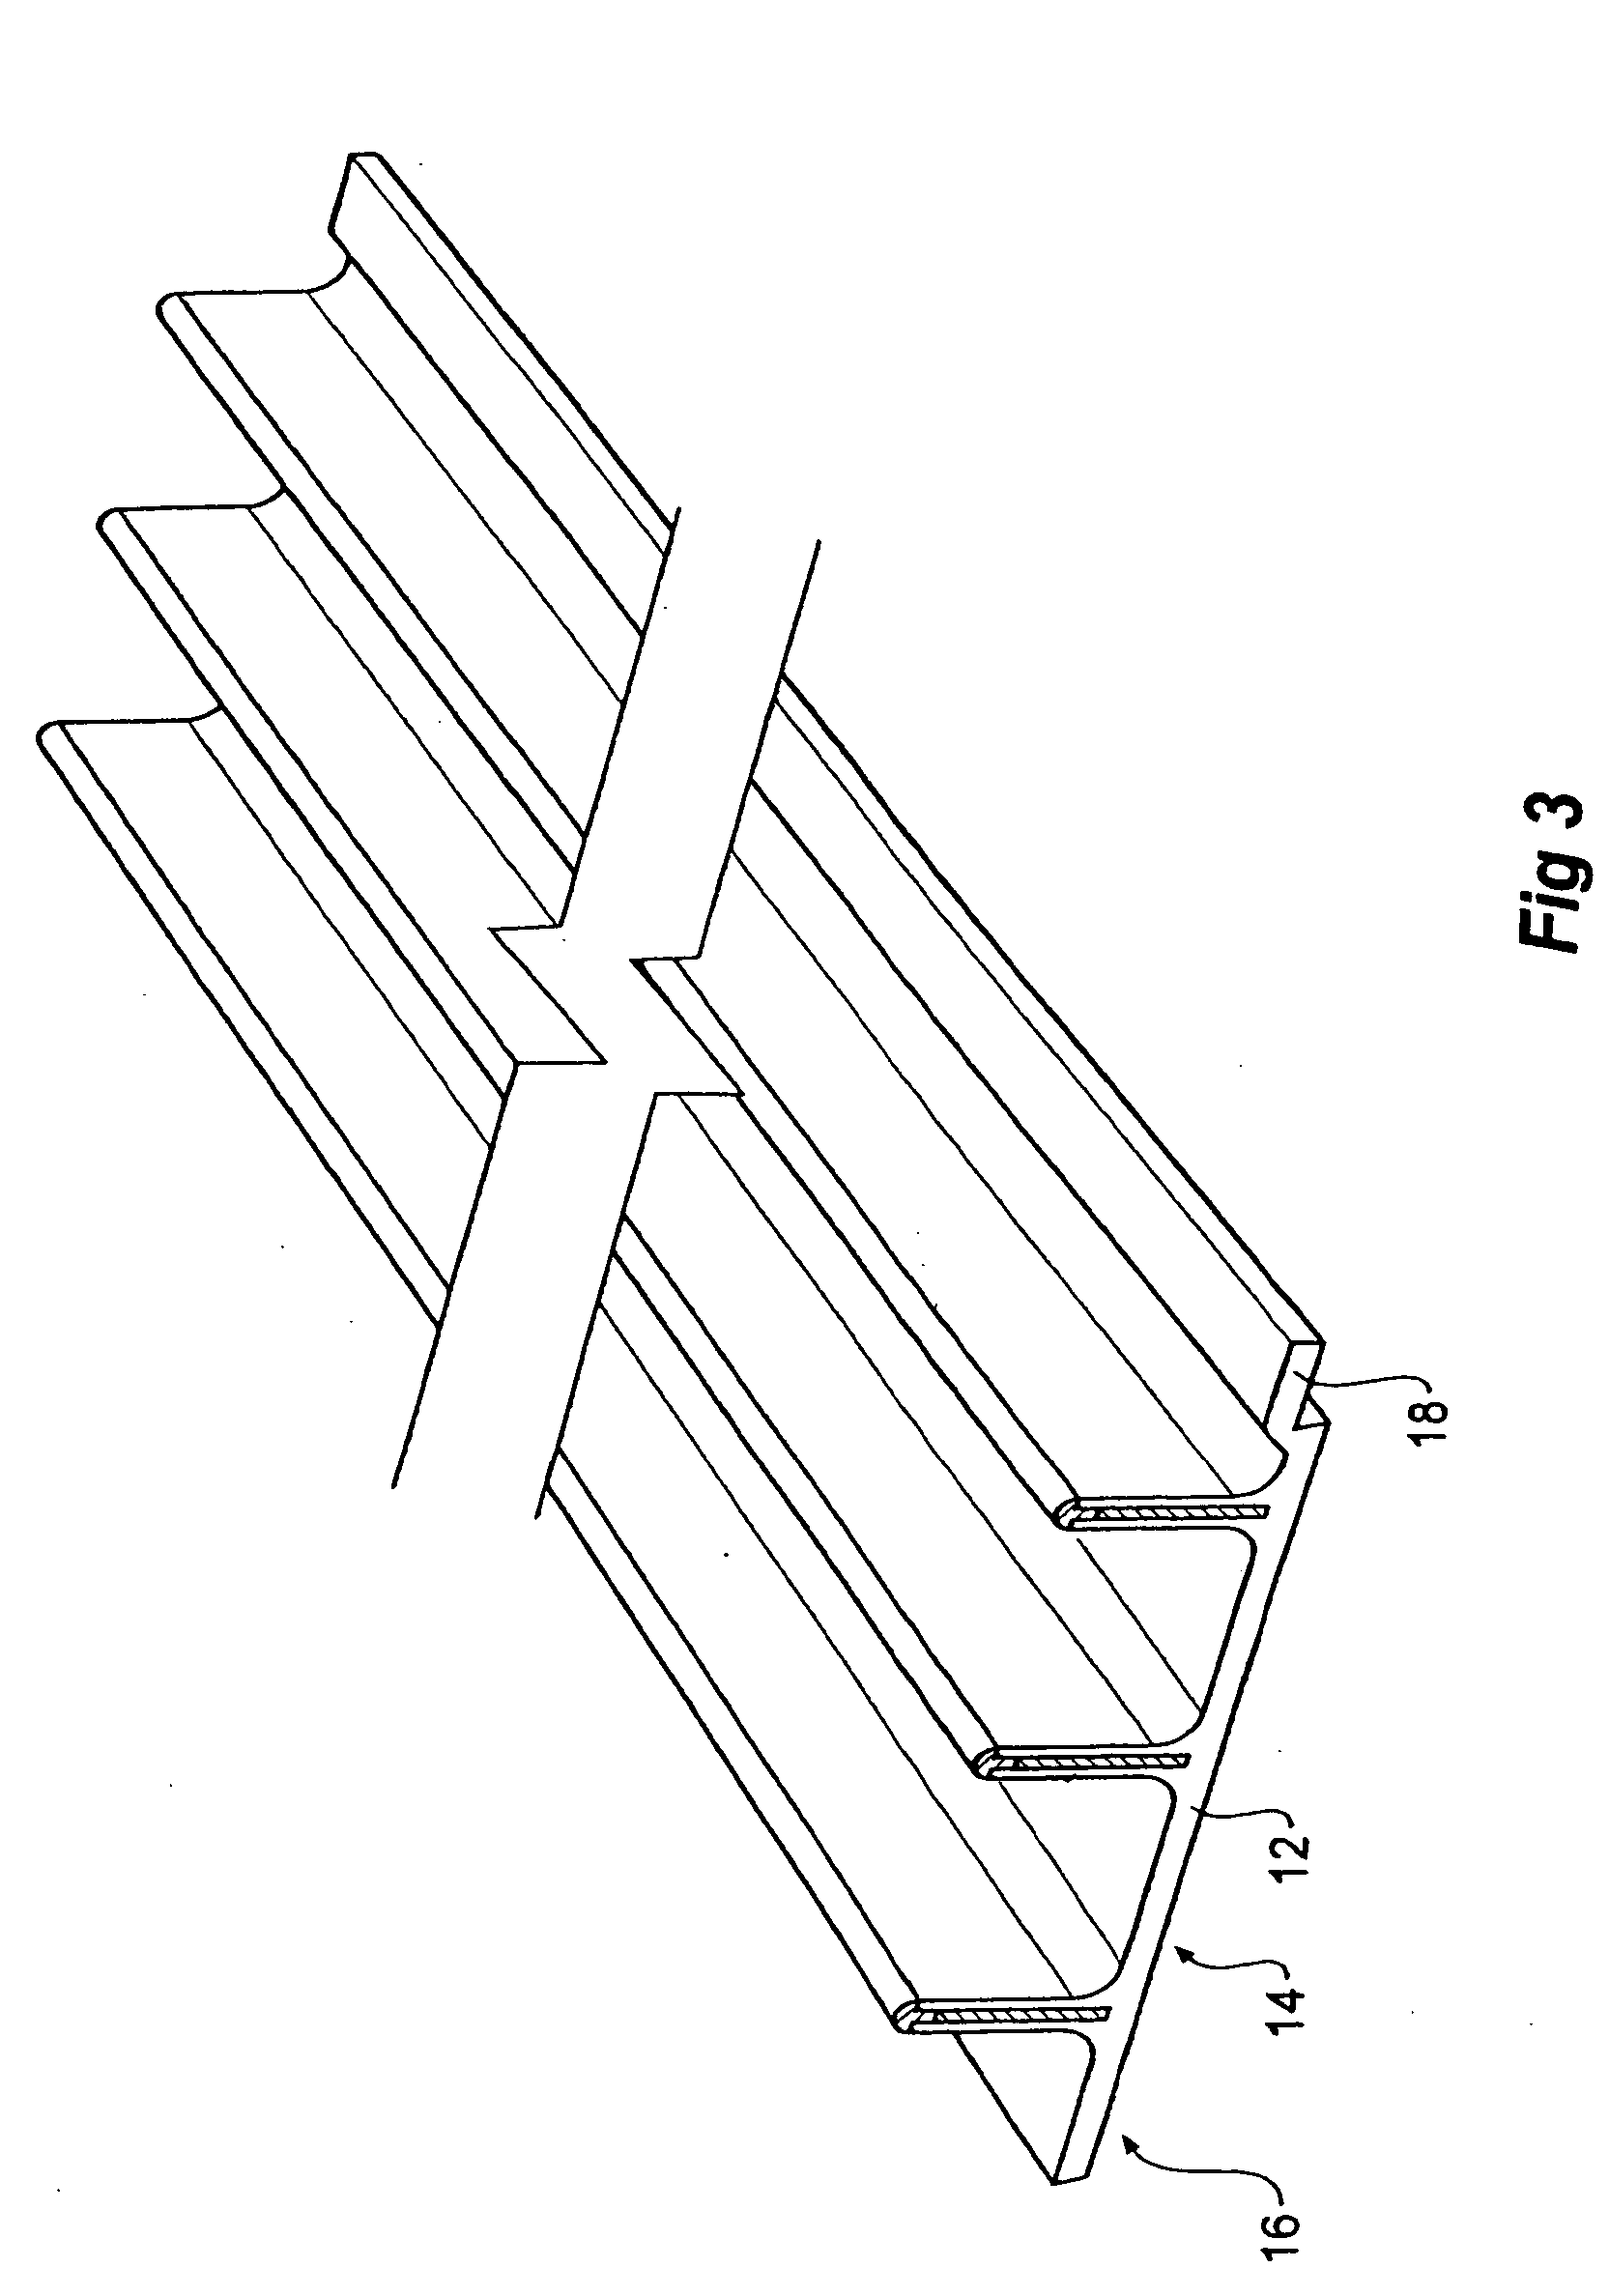 Composite strip windable to form a helical pipe and method therefor